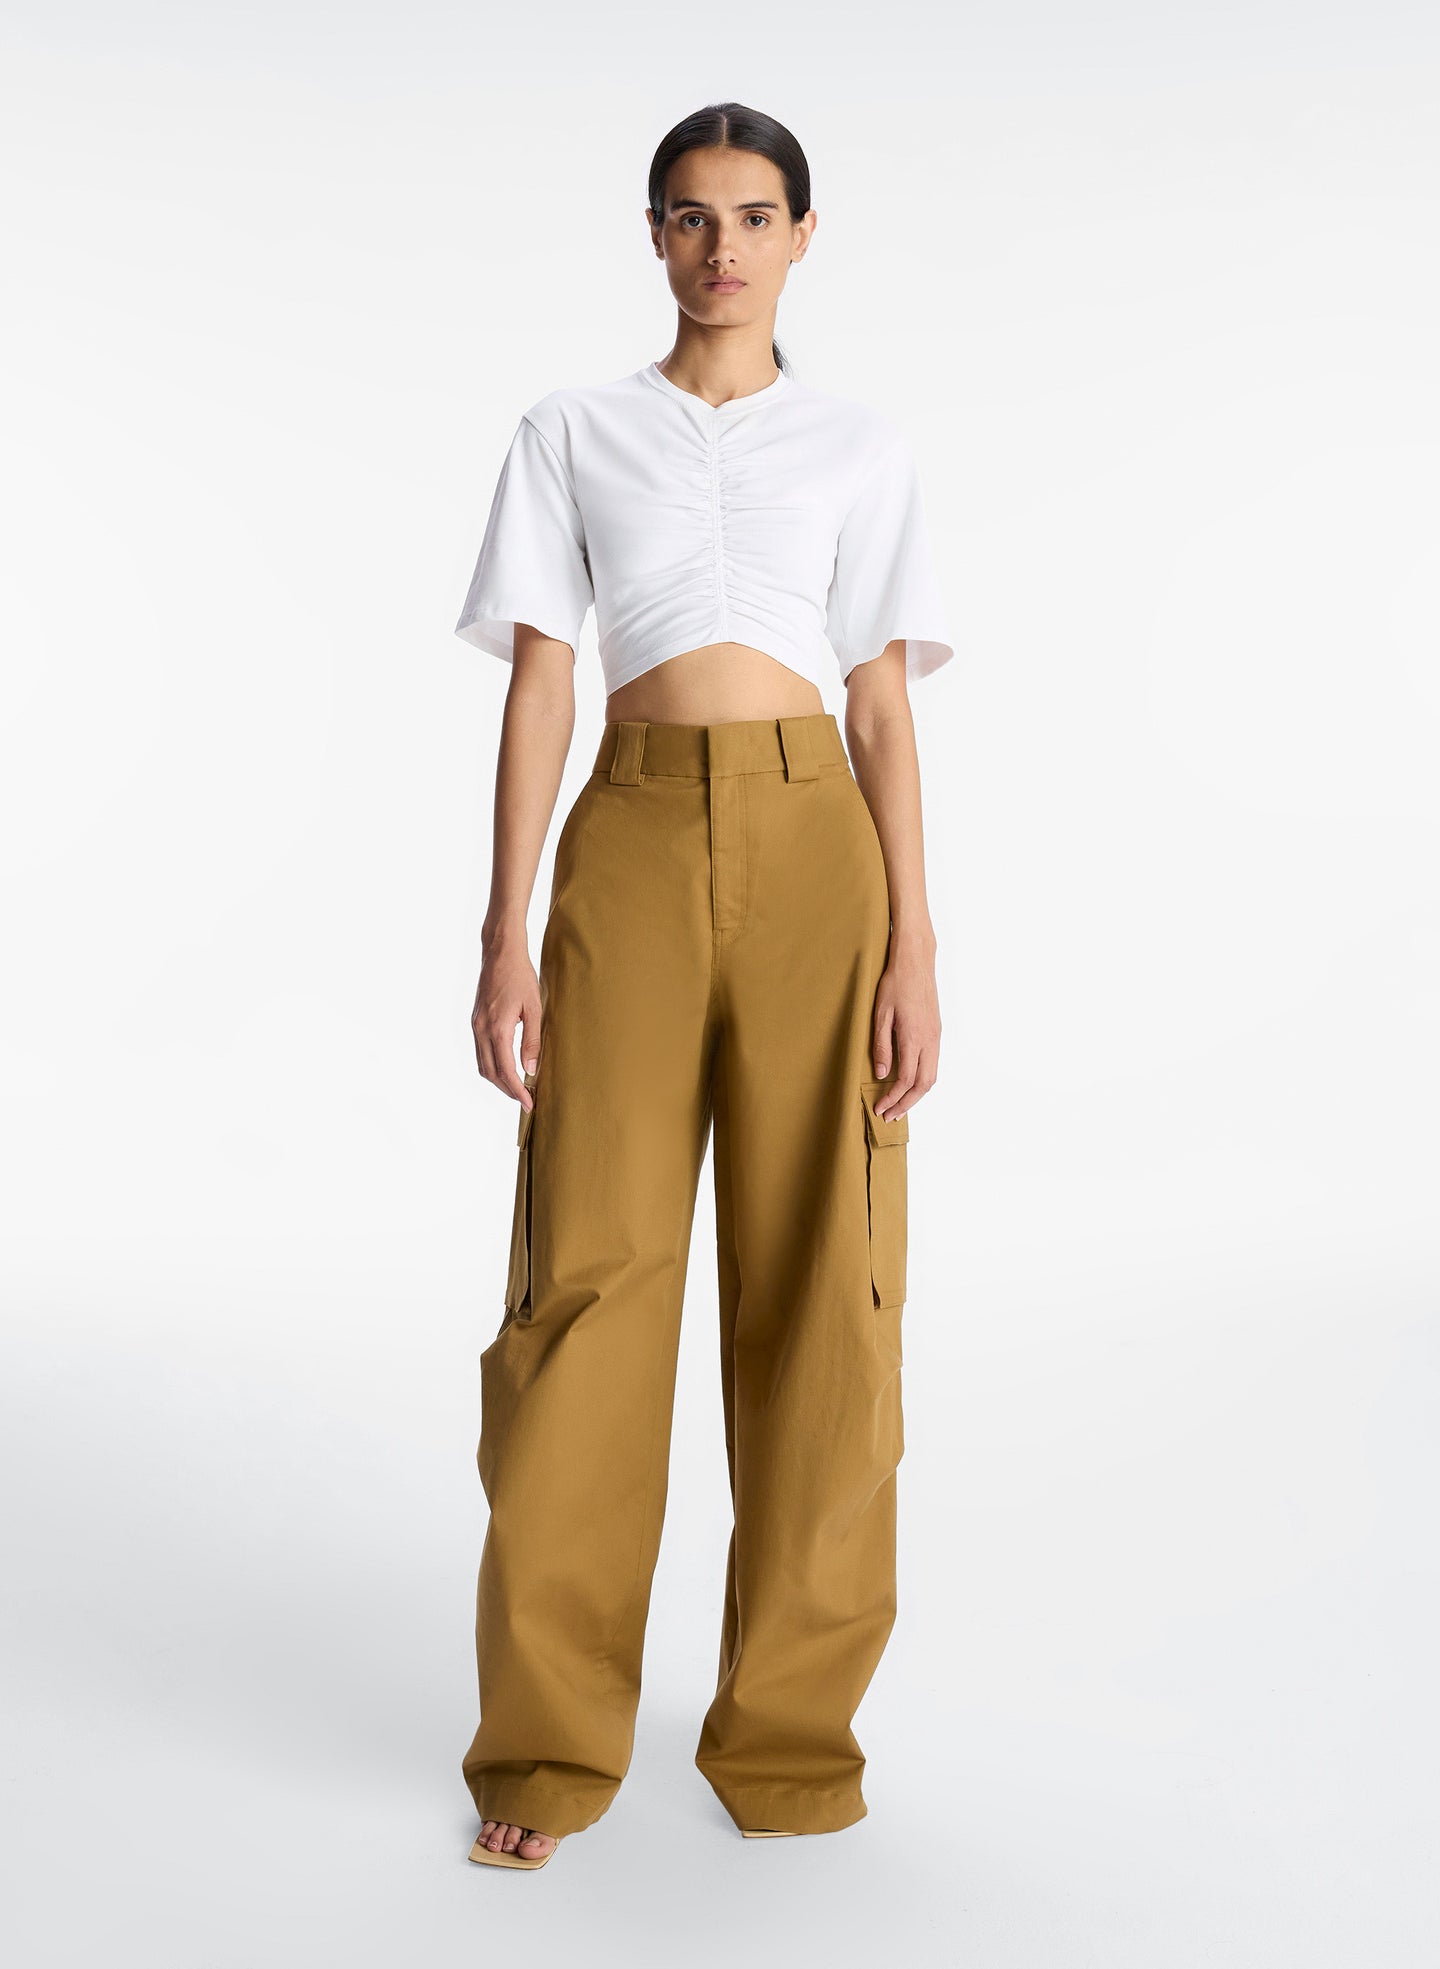 front view of woman wearing white tshirt with center ruching and tan cargo pants